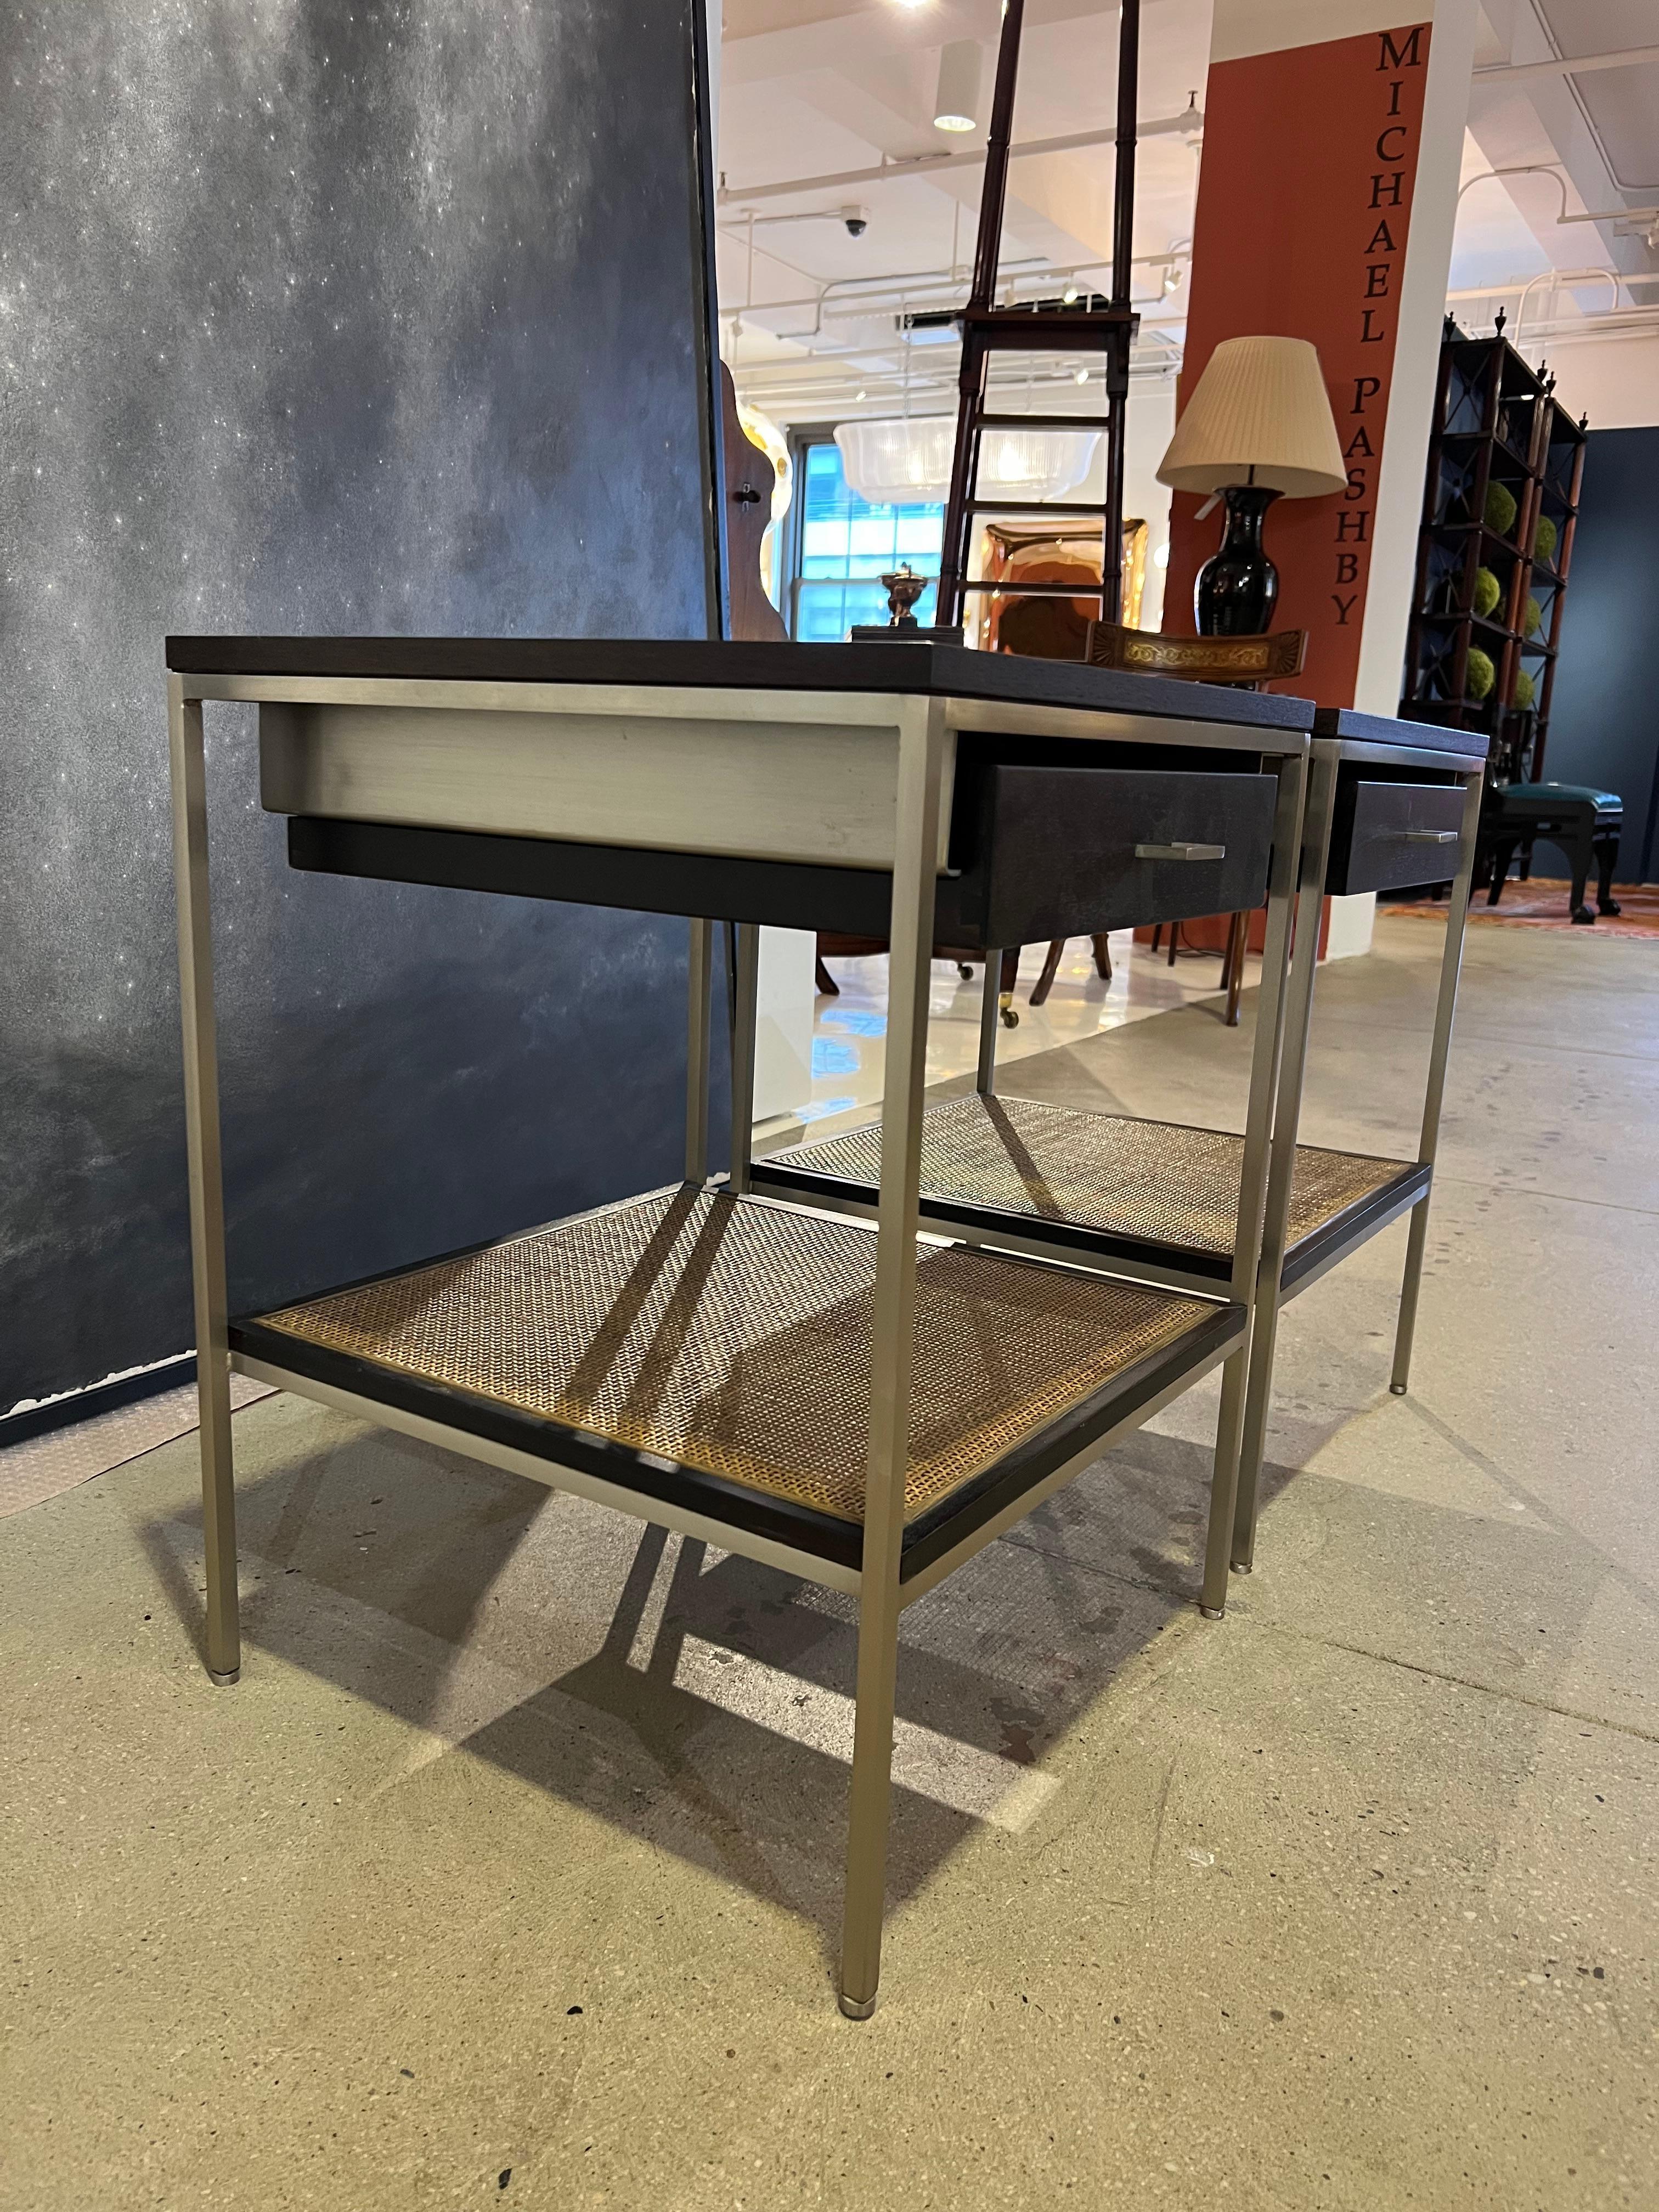 ReGeneration has been manufacturing it's bespoke furniture line since the early 2000's. Known for their signature, re: 392 bedside tables, this pair in walnut and stainless steel is in stock now.